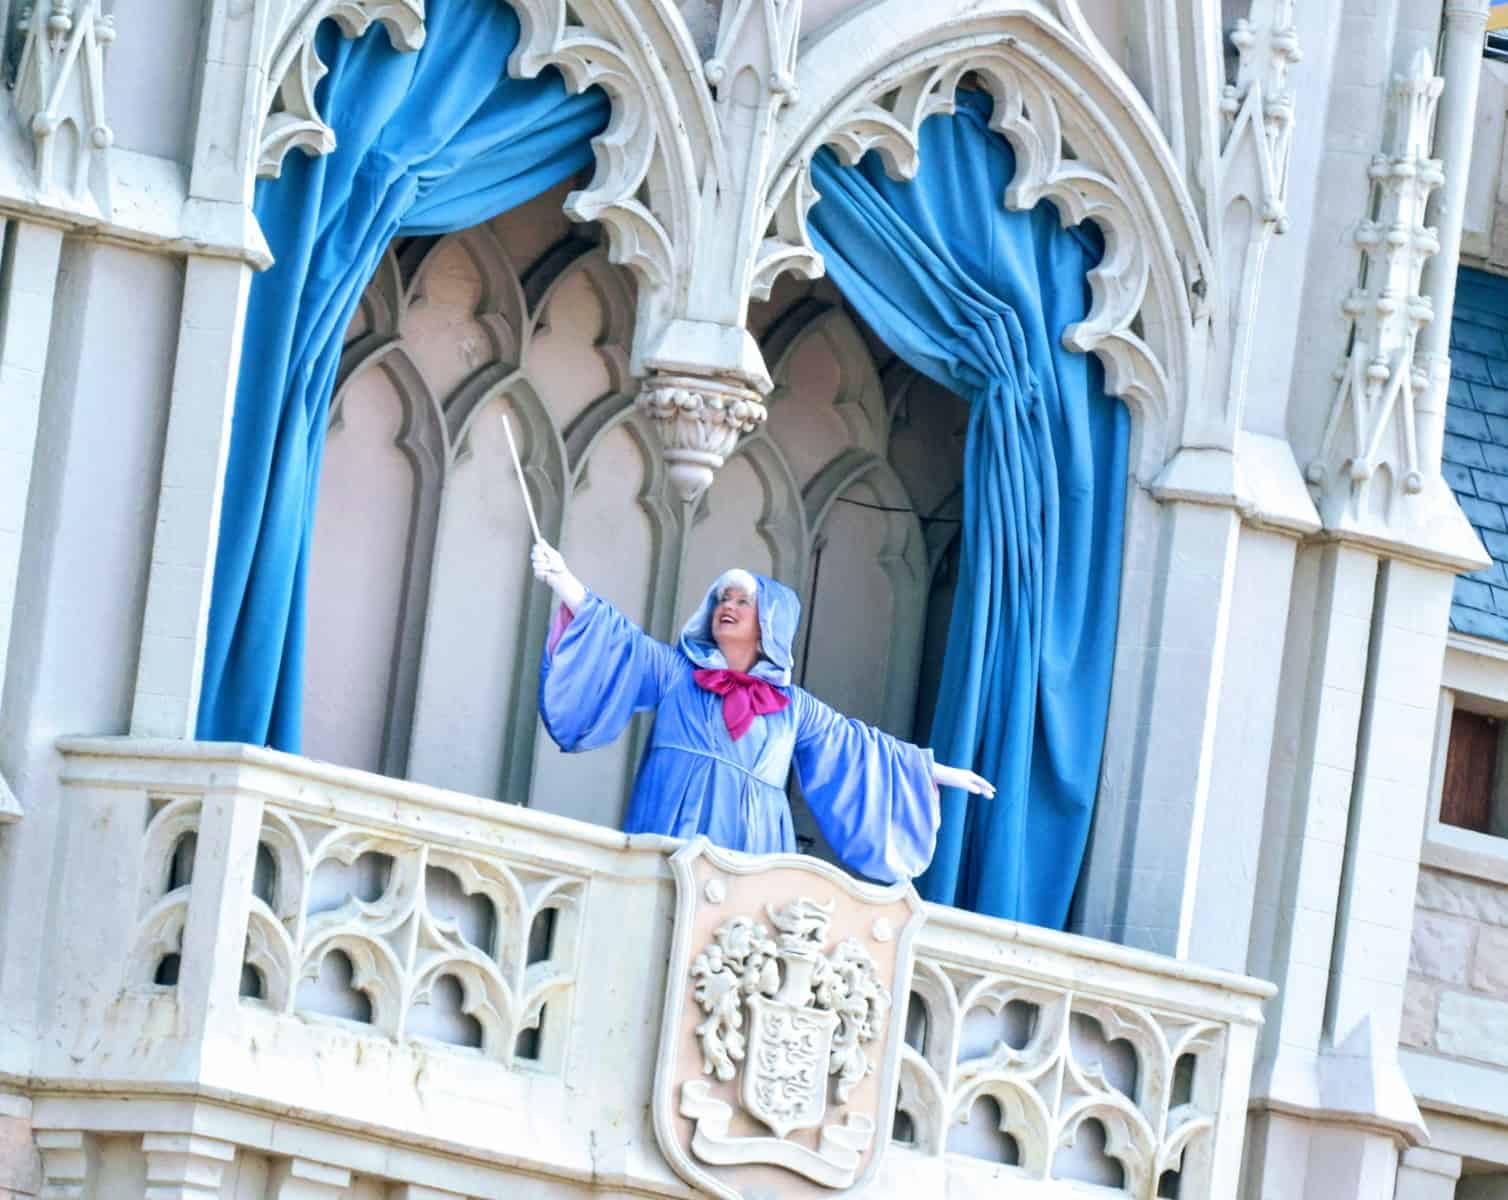 About the Magic Kingdom opening procedure